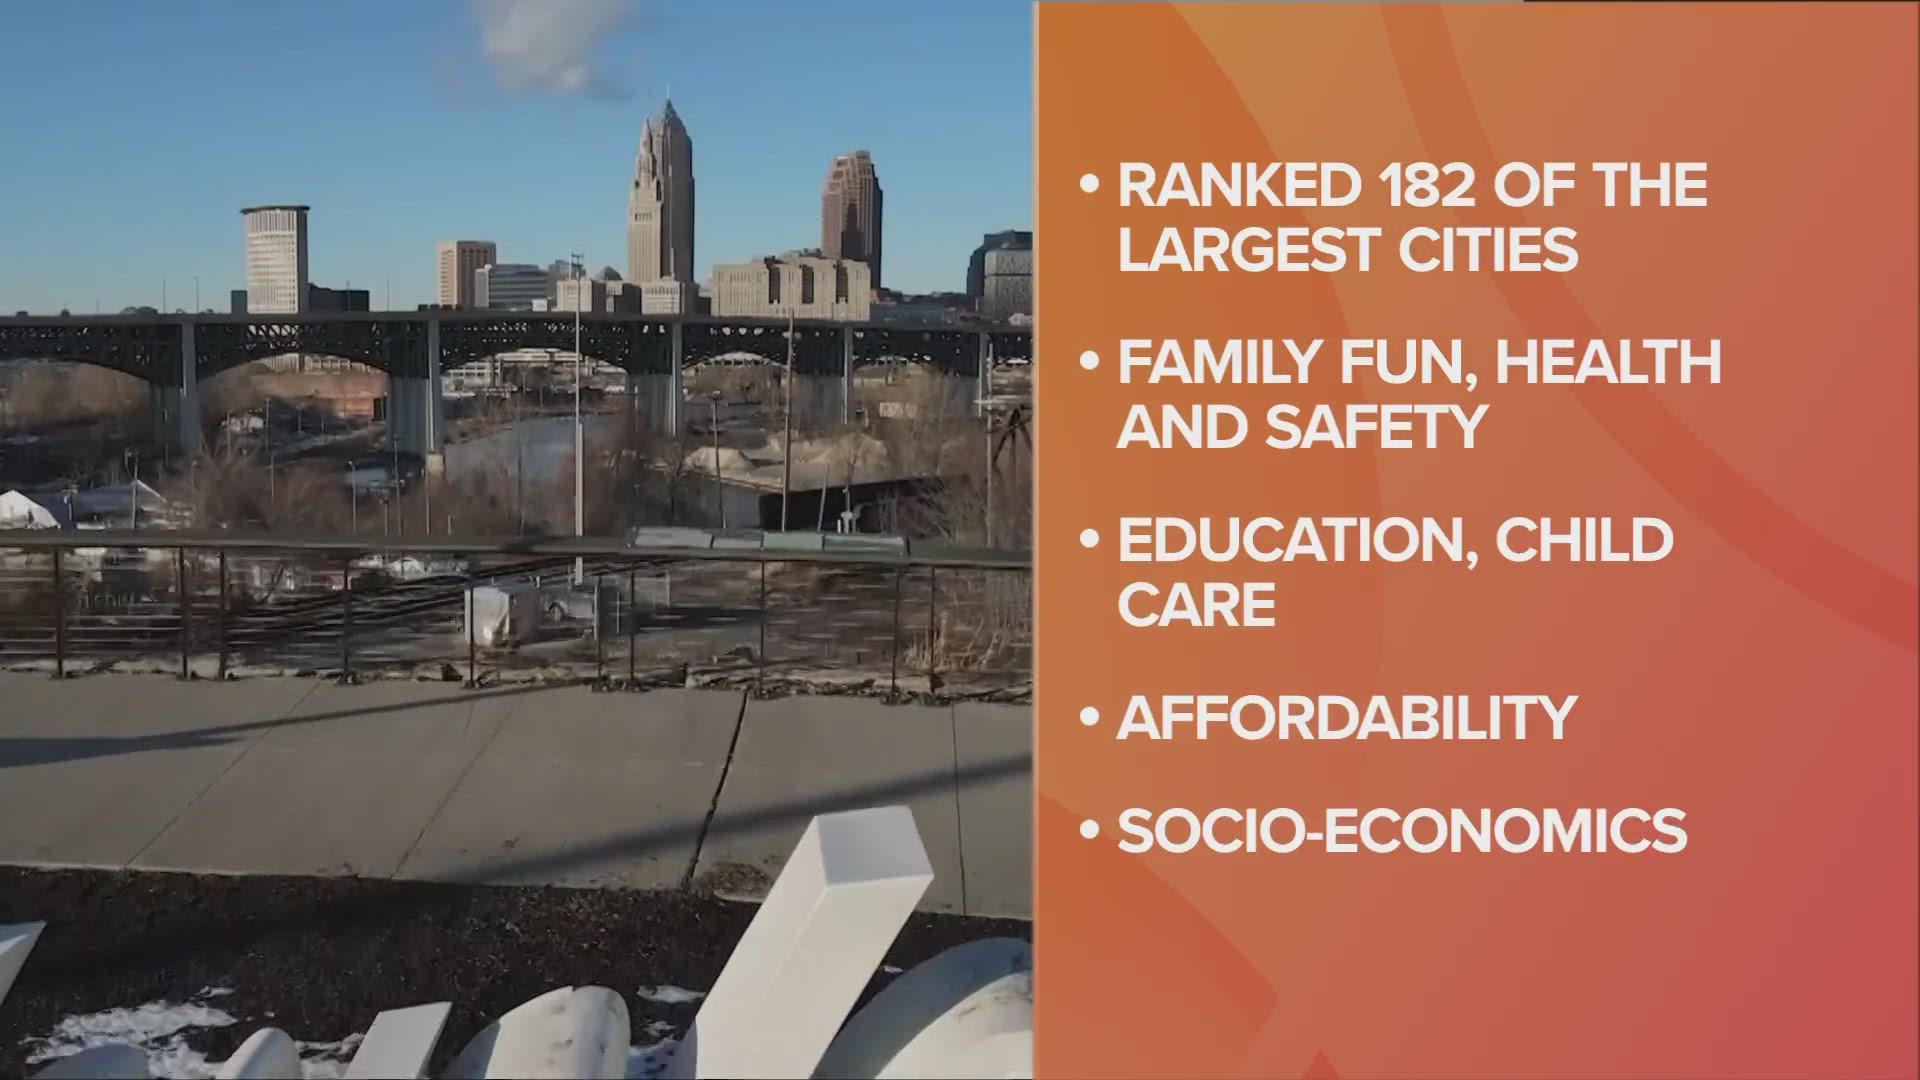 WalletHub's data revealed that among the 182 largest cities in America, Cleveland is the worst city to raise a family.